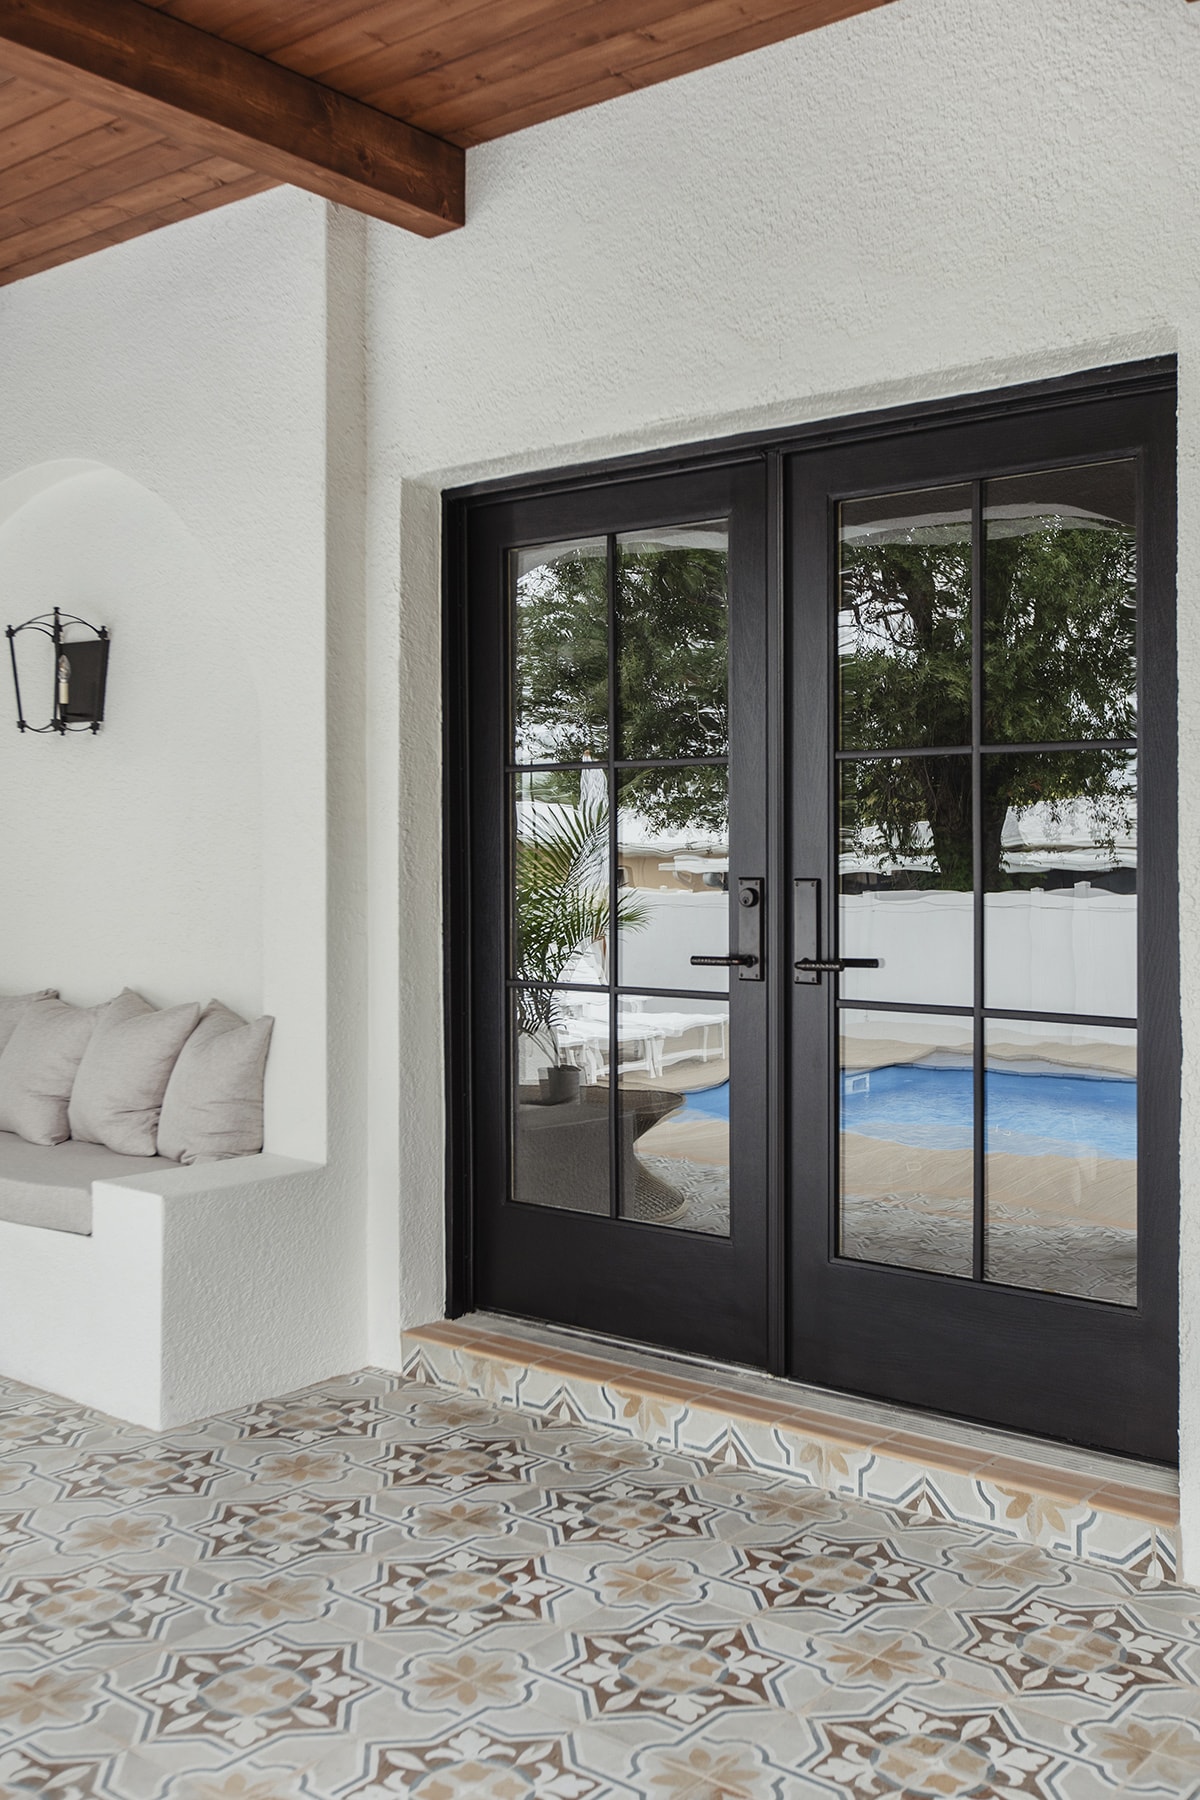 Double French Doors for Interior or Exterior in Painted Black Finish